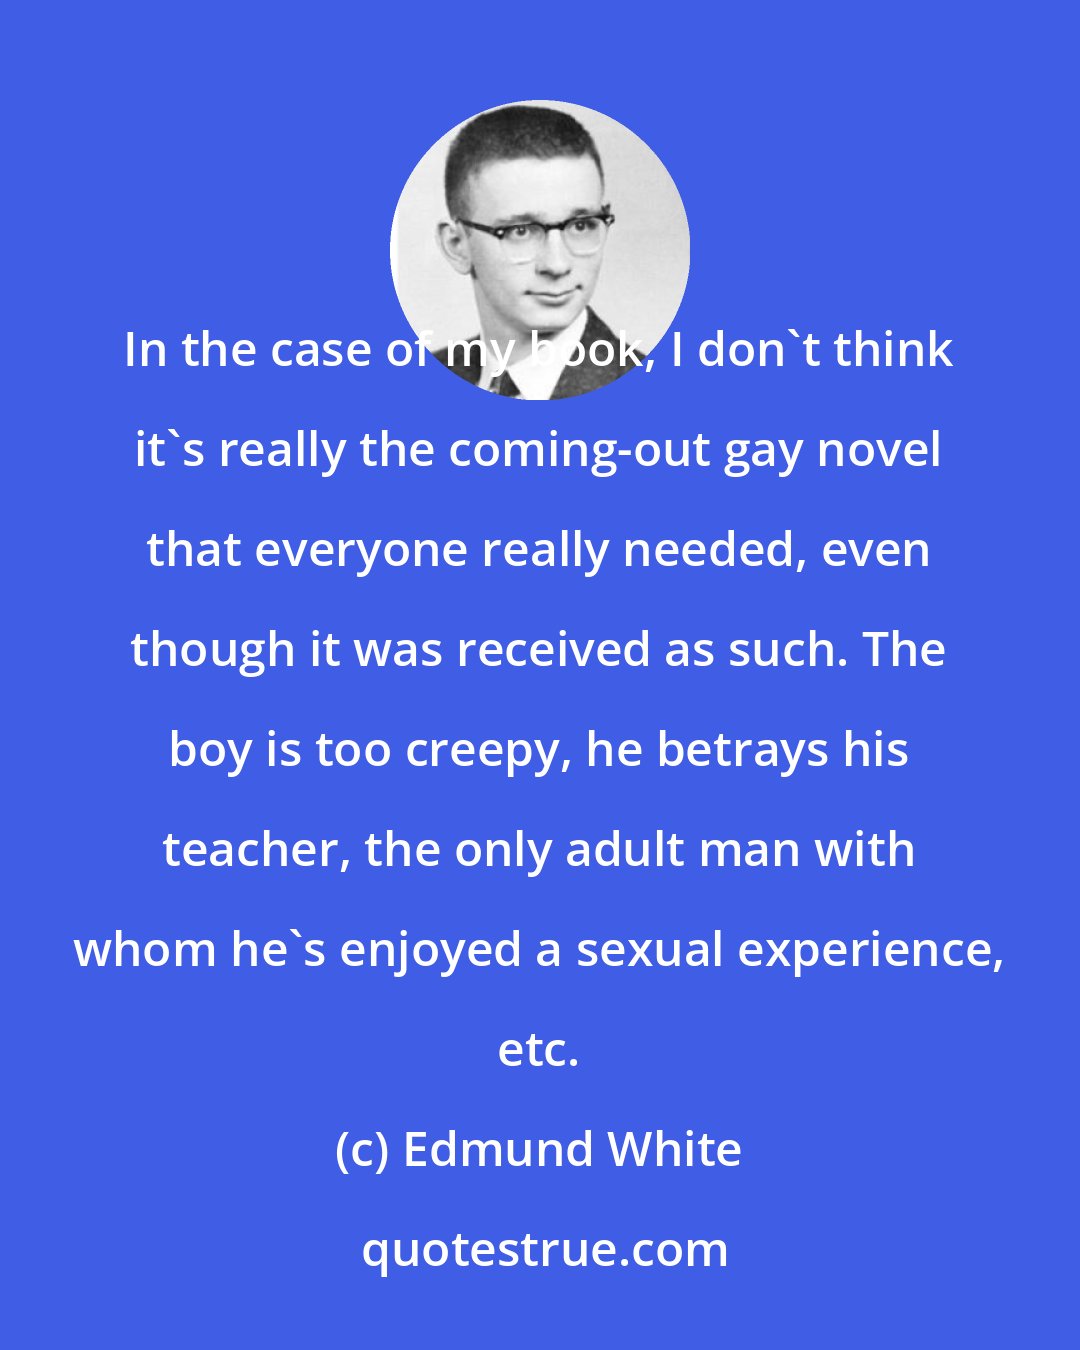 Edmund White: In the case of my book, I don't think it's really the coming-out gay novel that everyone really needed, even though it was received as such. The boy is too creepy, he betrays his teacher, the only adult man with whom he's enjoyed a sexual experience, etc.